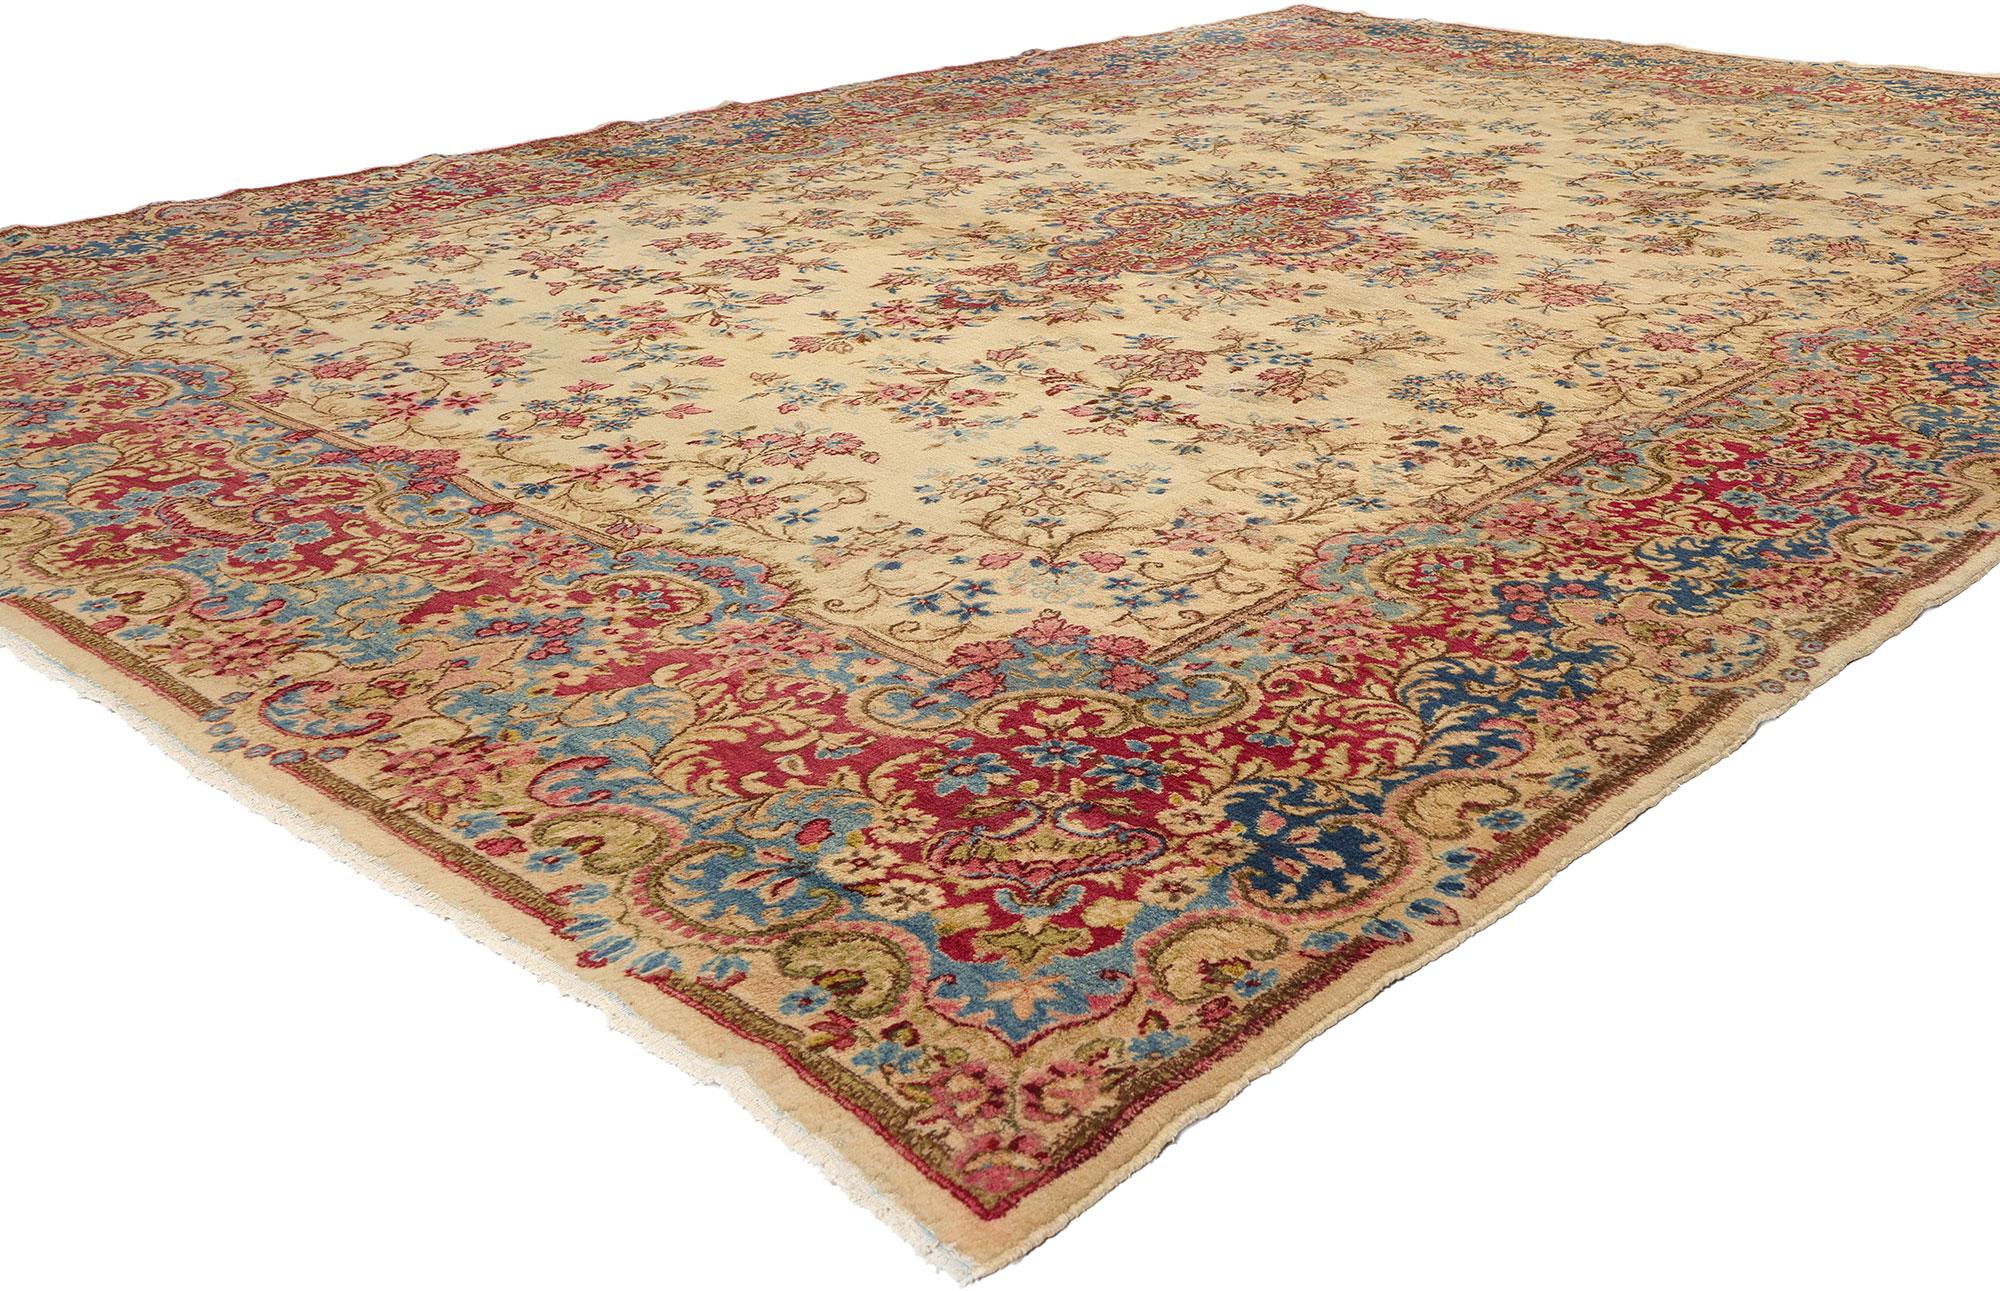 74920 Vintage Persian Kerman Rug, 09'09 x 13'04. The legacy of Kerman rugs unfolds from the captivating heart of south-central Iran, where the city of Kerman weaves tales of timeless artistry. This vibrant center of weaving bears witness to